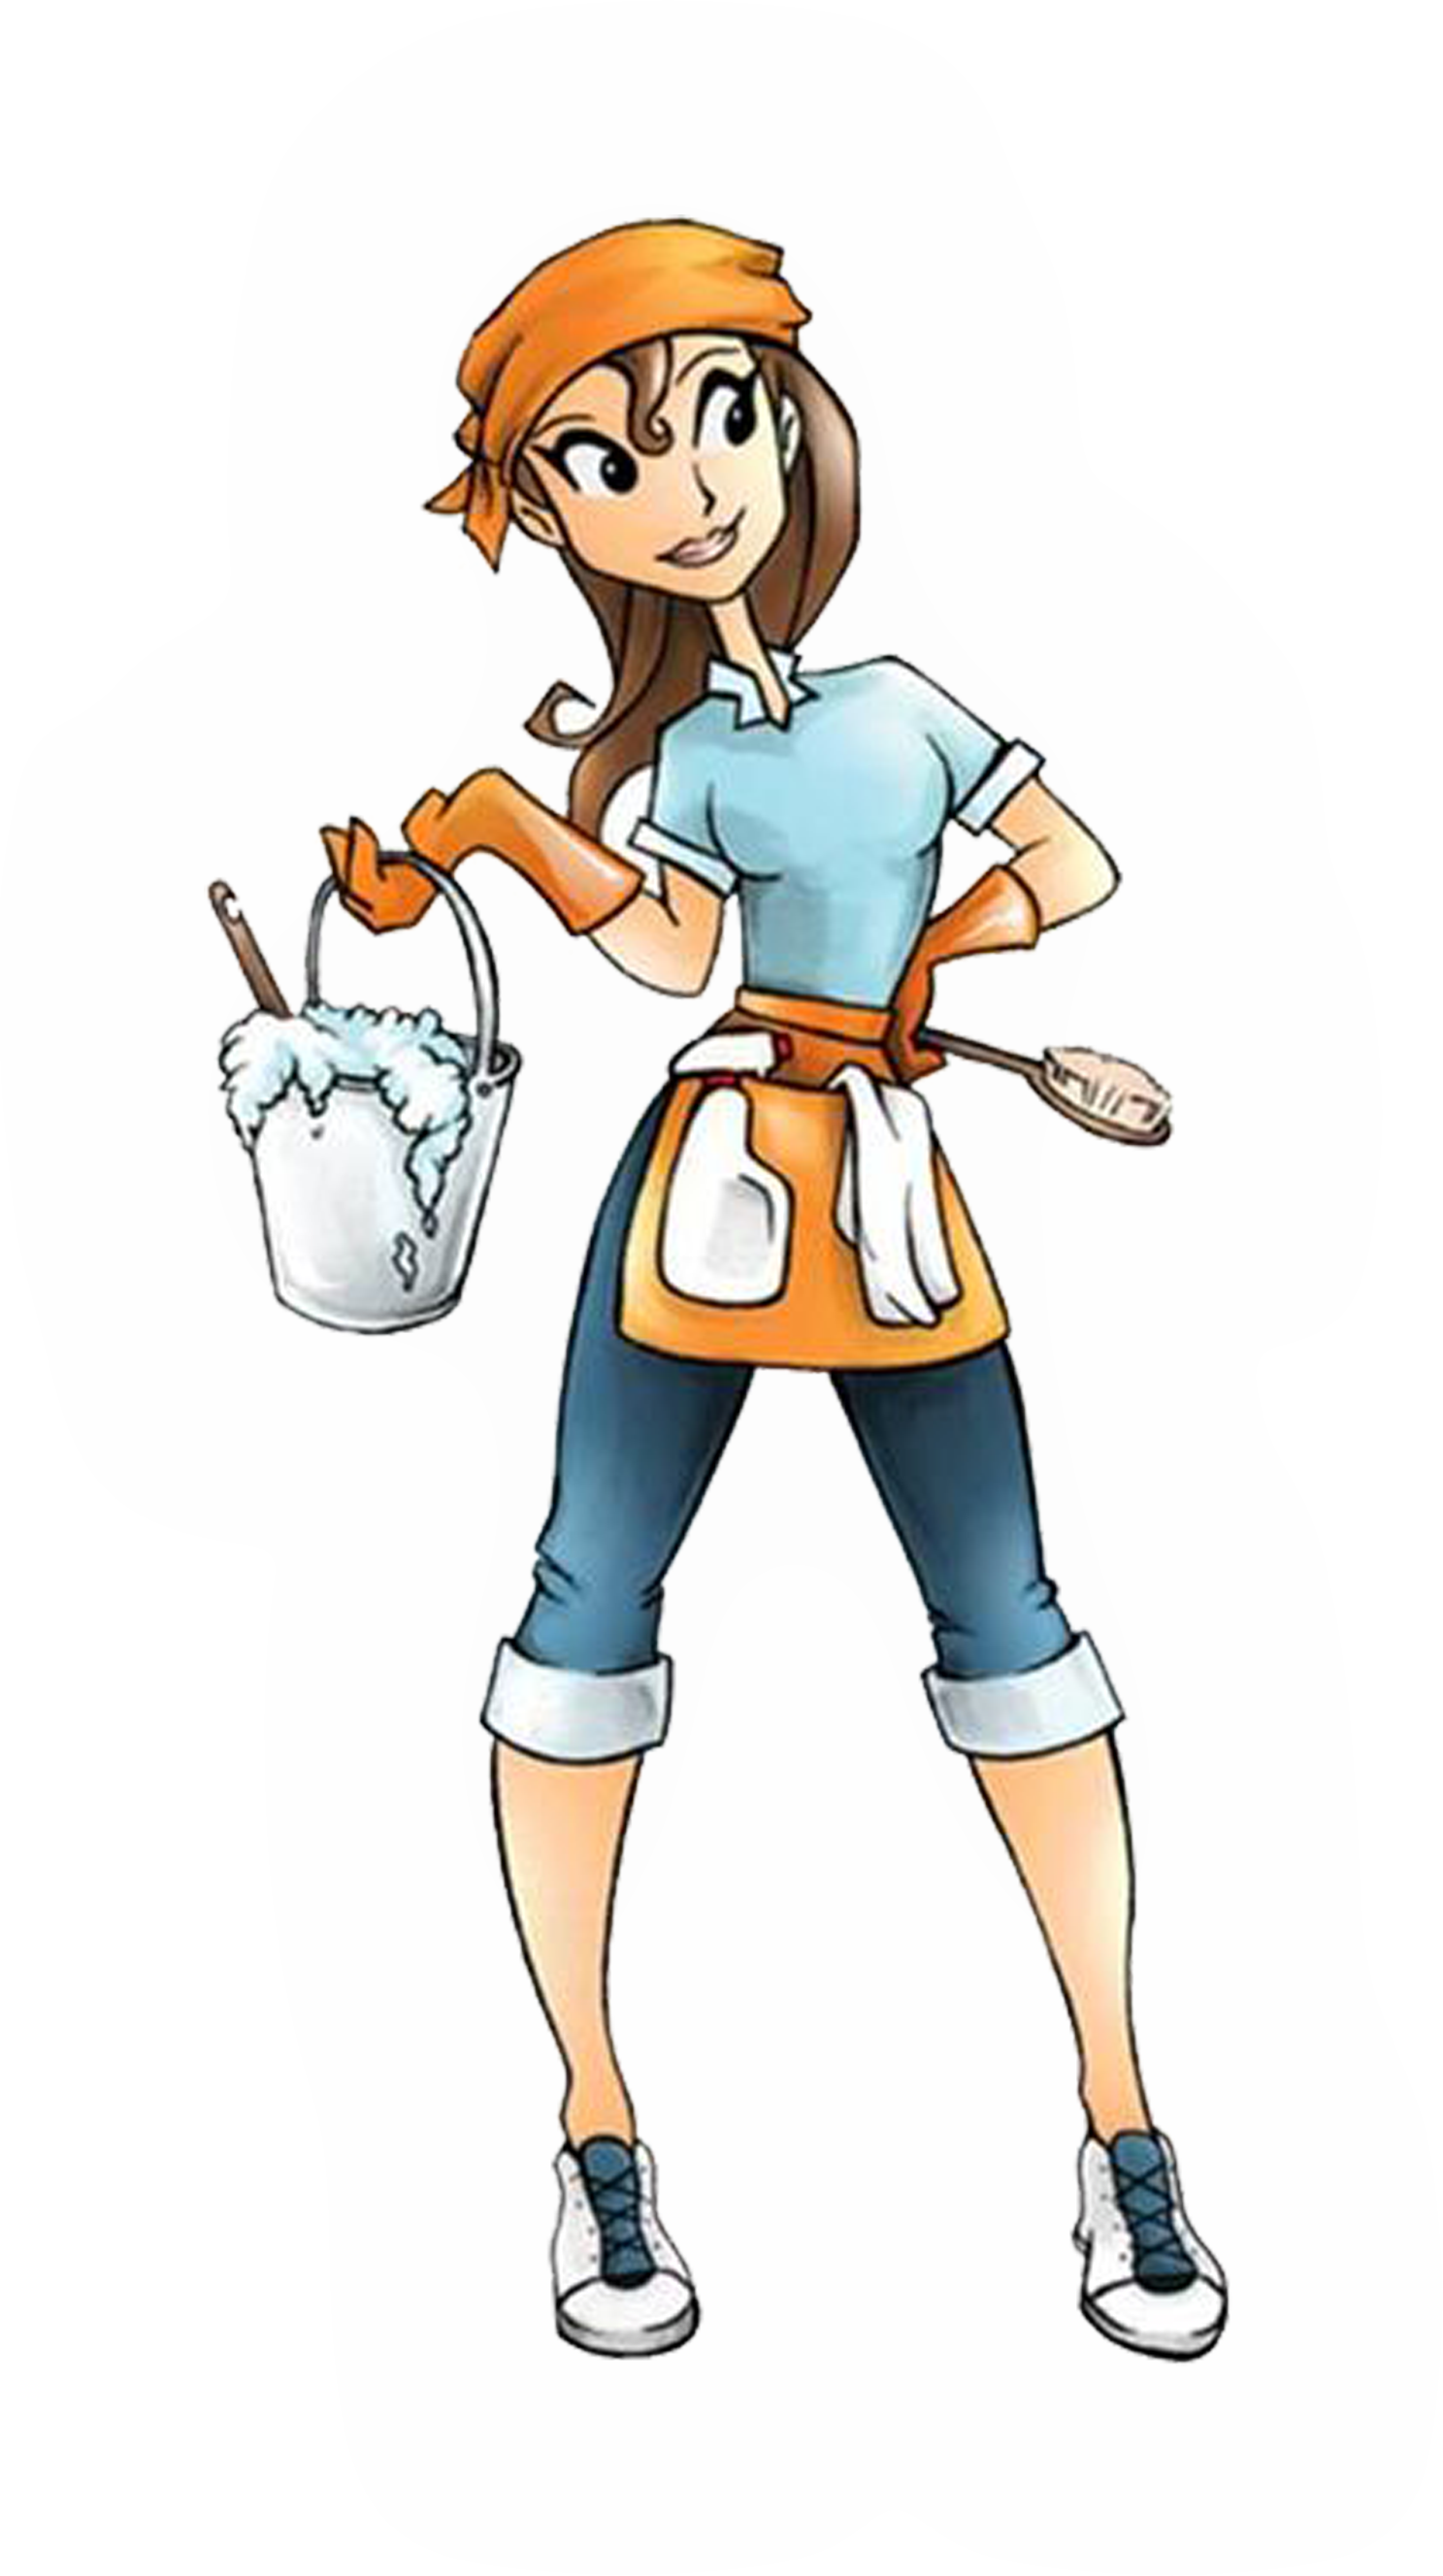 Free Cleaning Woman Cliparts, Download Free Clip Art, Free.